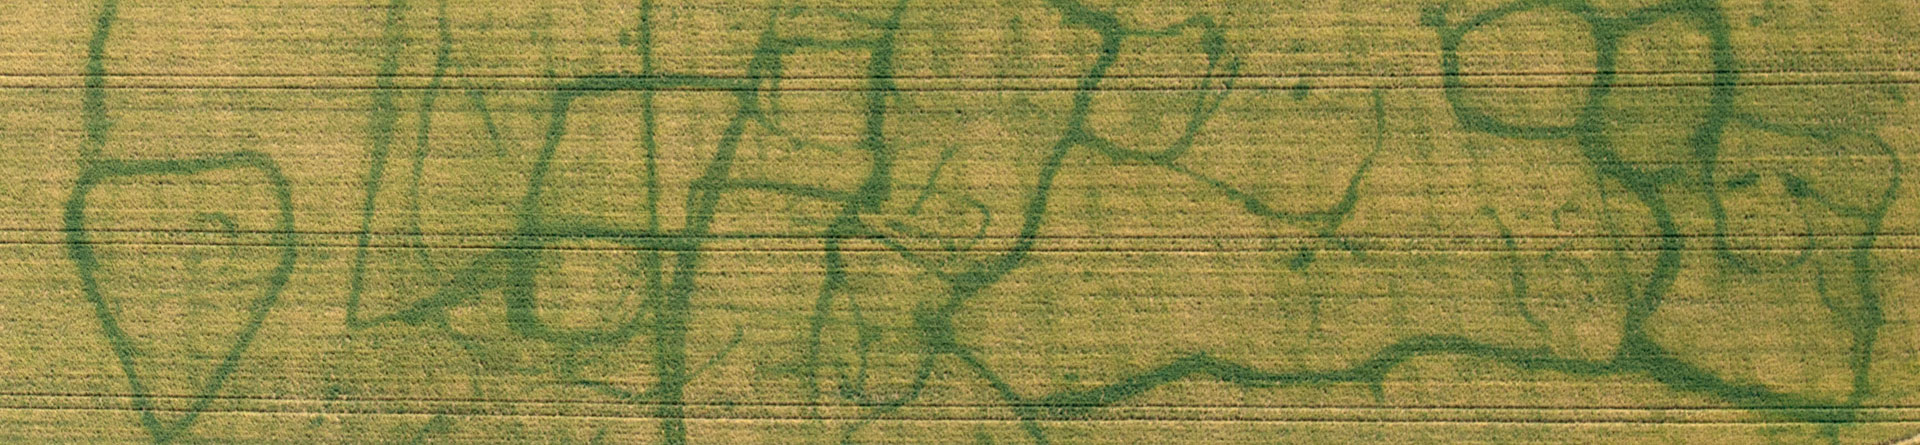 Colour aerial photograph showing green patterns on a background yellow field in crop